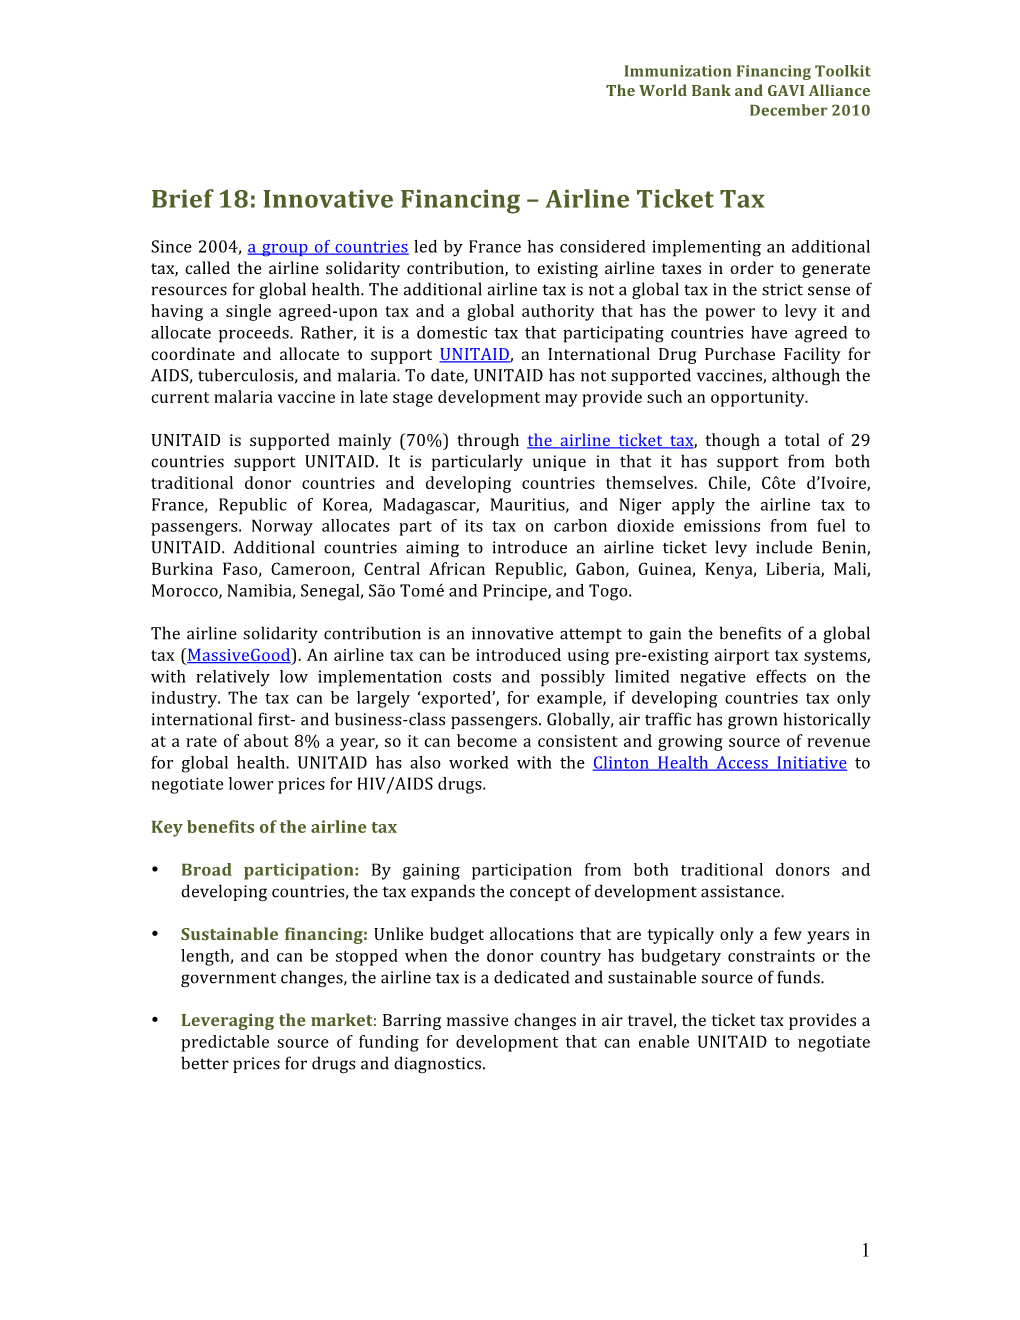 Brief 18: Innovative Financing – Airline Ticket Tax